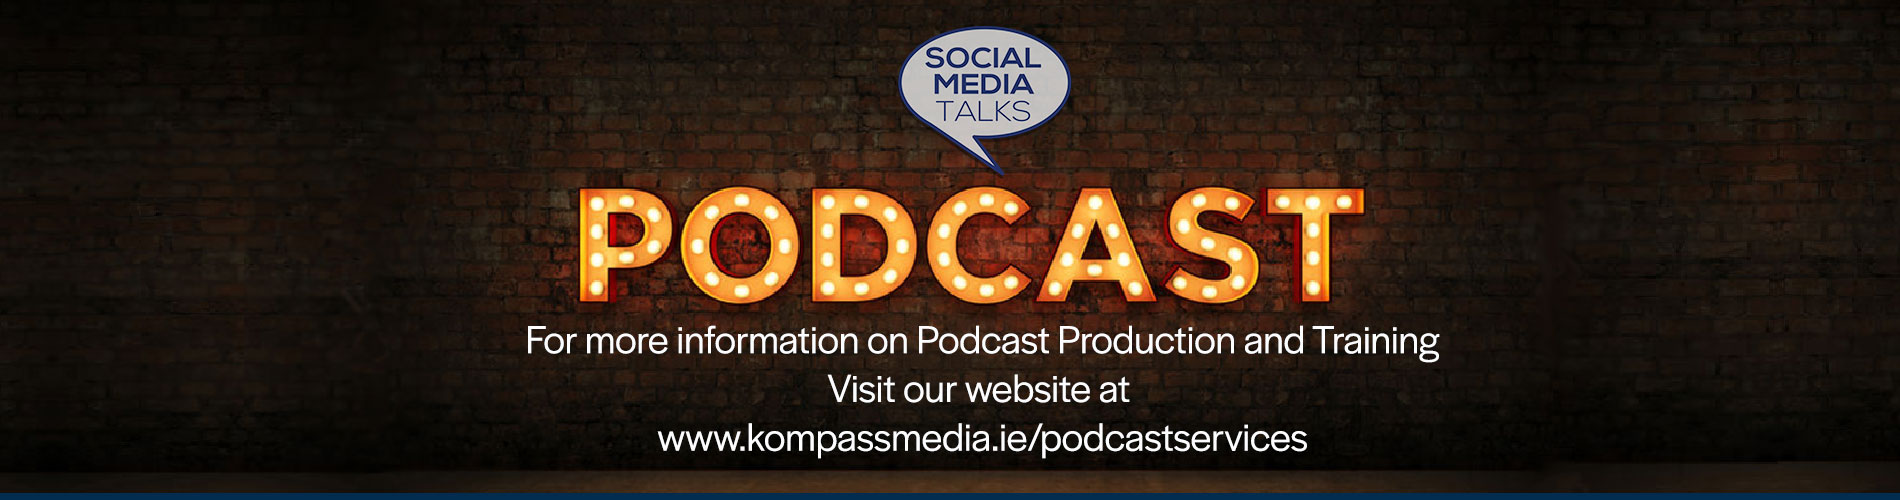 https://kompassmedia.ie/services/podcast-services/